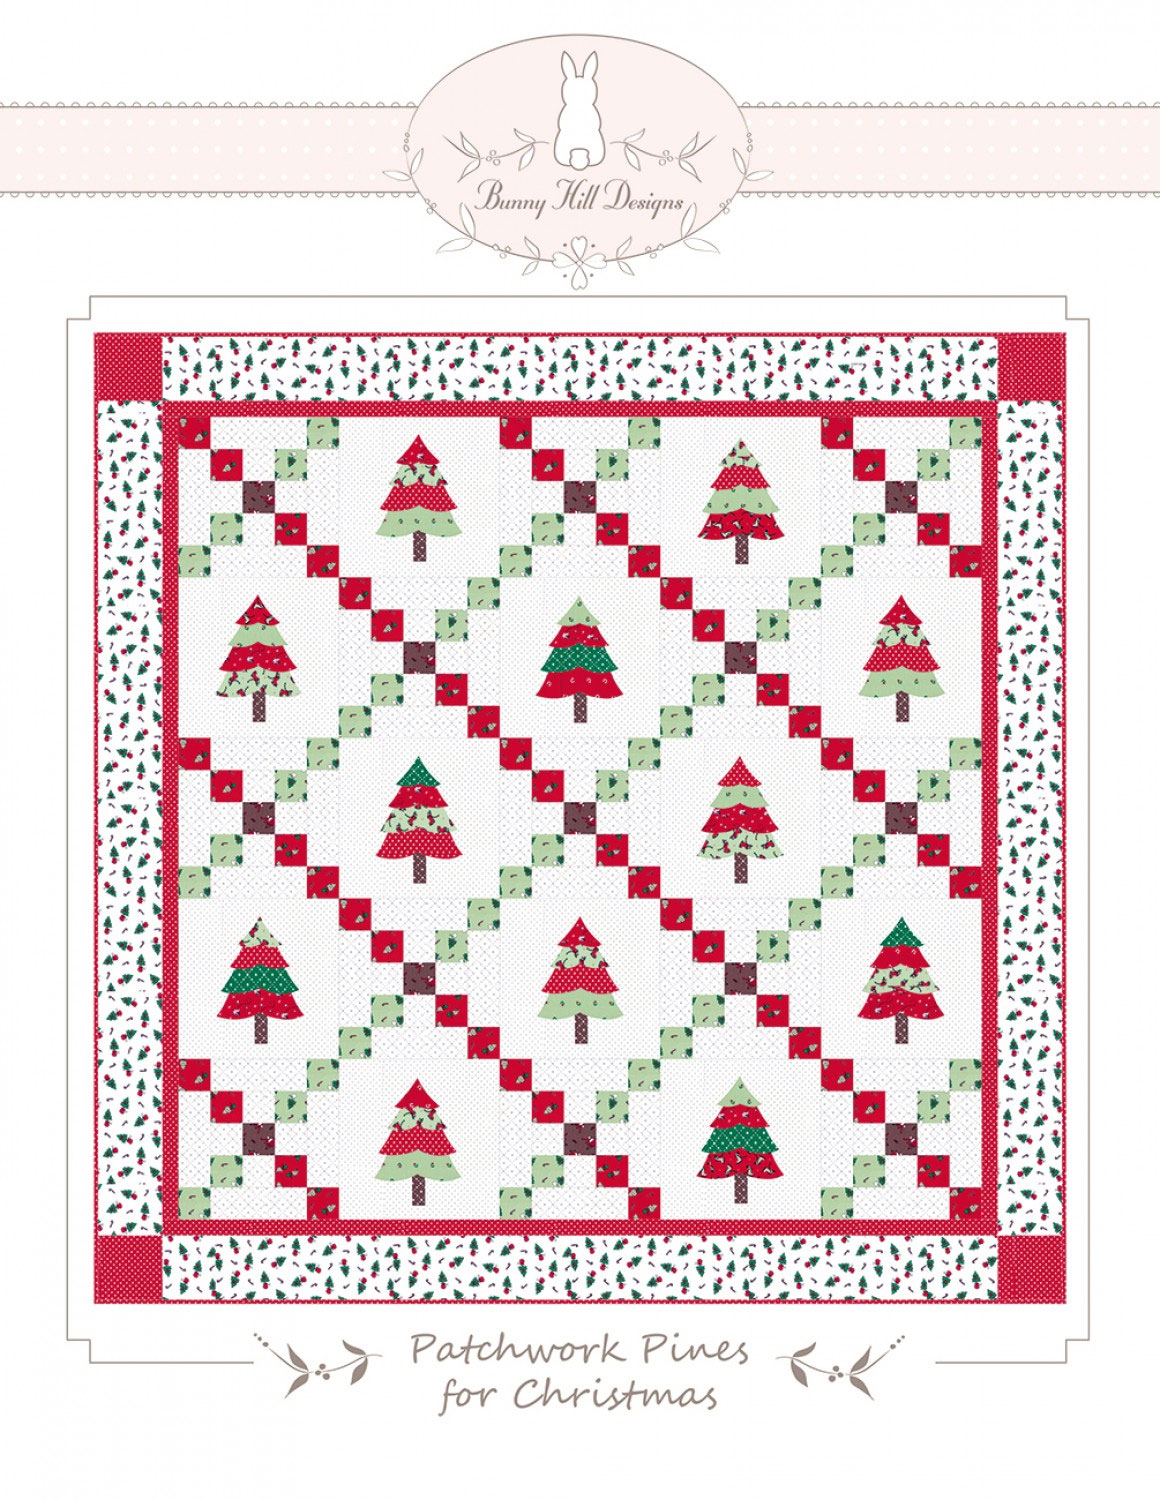 Patchwork-Pines-for-christmas-sewing-pattern-Bunny-Hill-Designs-front